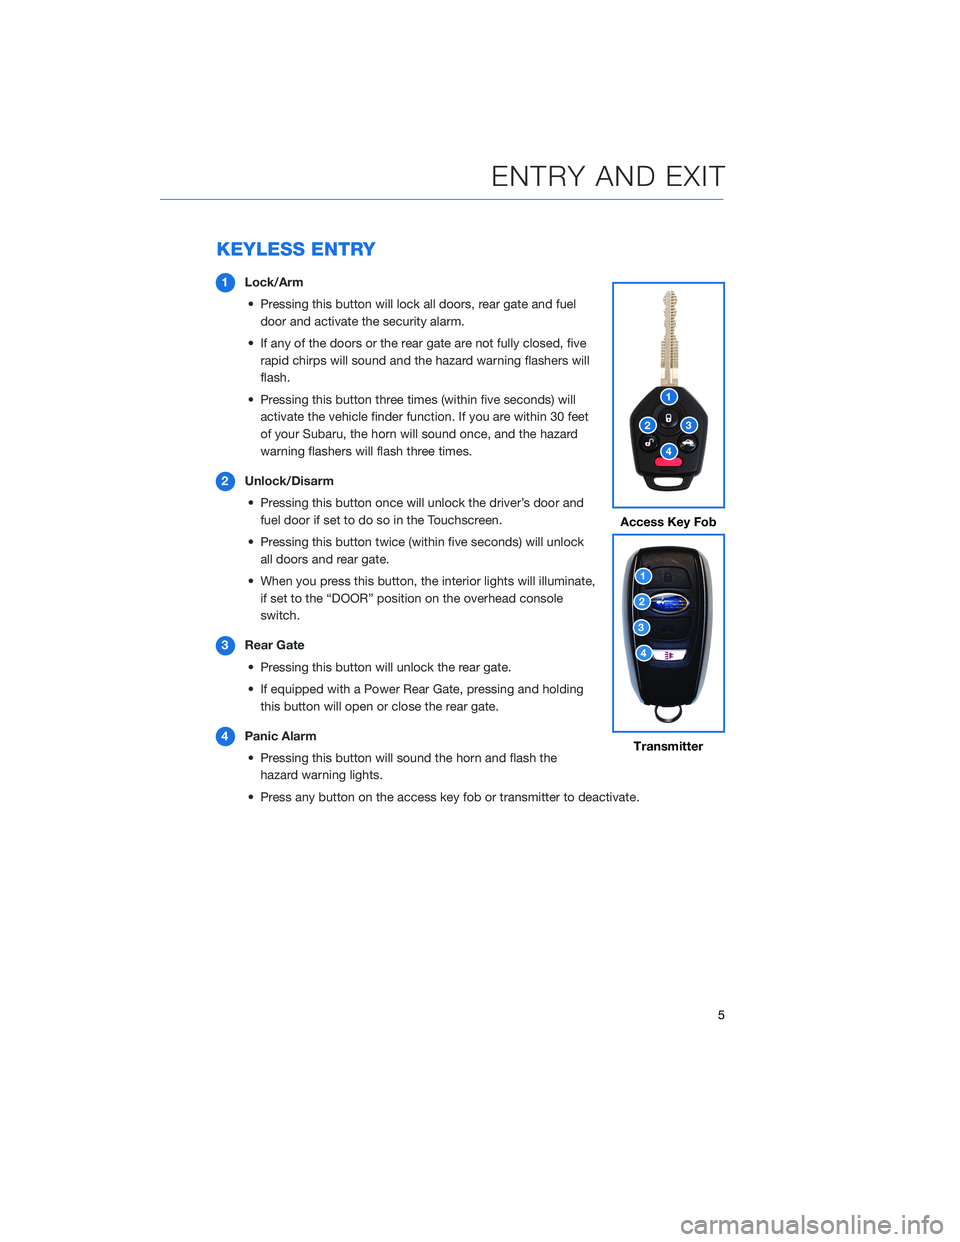 SUBARU ASCENT 2020  Quick Guide KEYLESS ENTRY
1Lock/Arm
• Pressing this button will lock all doors, rear gate and fuel
door and activate the security alarm.
• If any of the doors or the rear gate are not fully closed, five
rapid